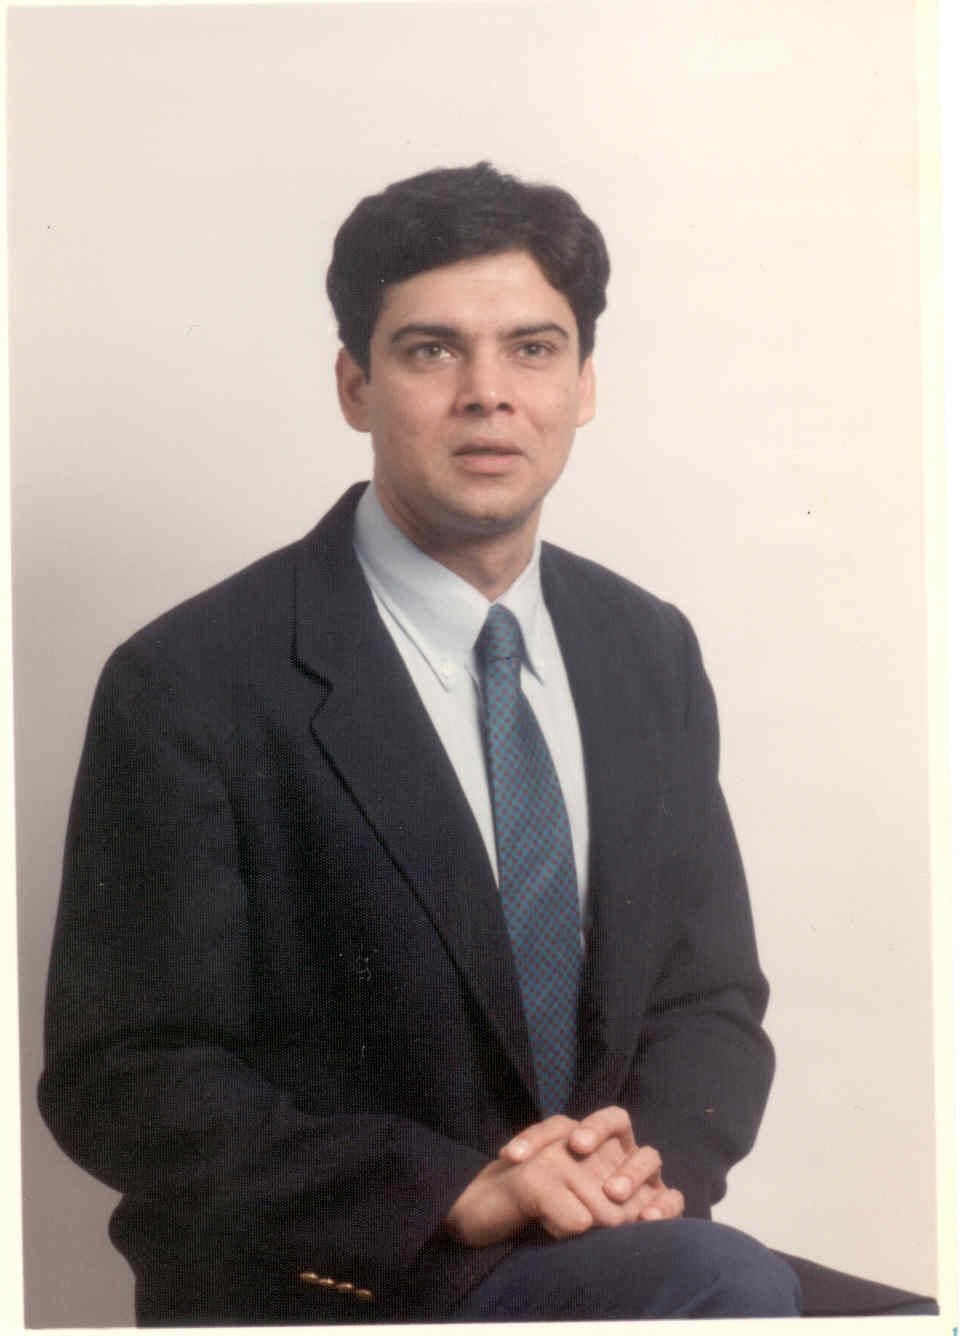  Myself at 35 years of age - Friendly, polite & honest Mr Anup in Springfield, Illinois - Then (1992)